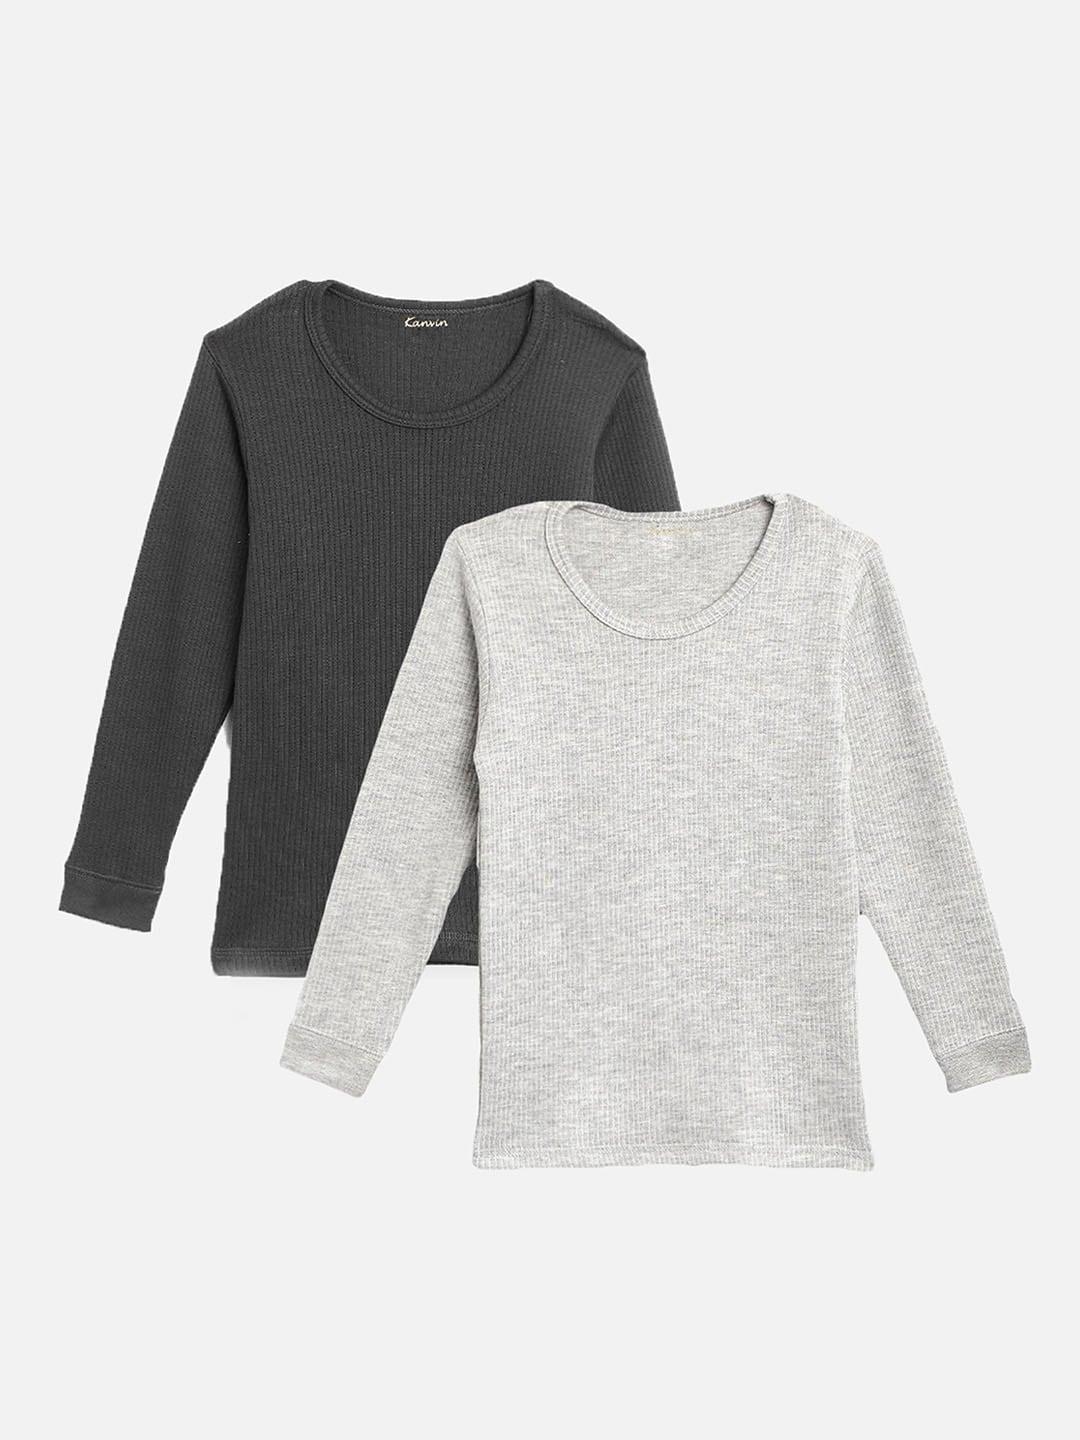 kanvin boys  charcoal grey and grey pack of 2 solid thermal tops